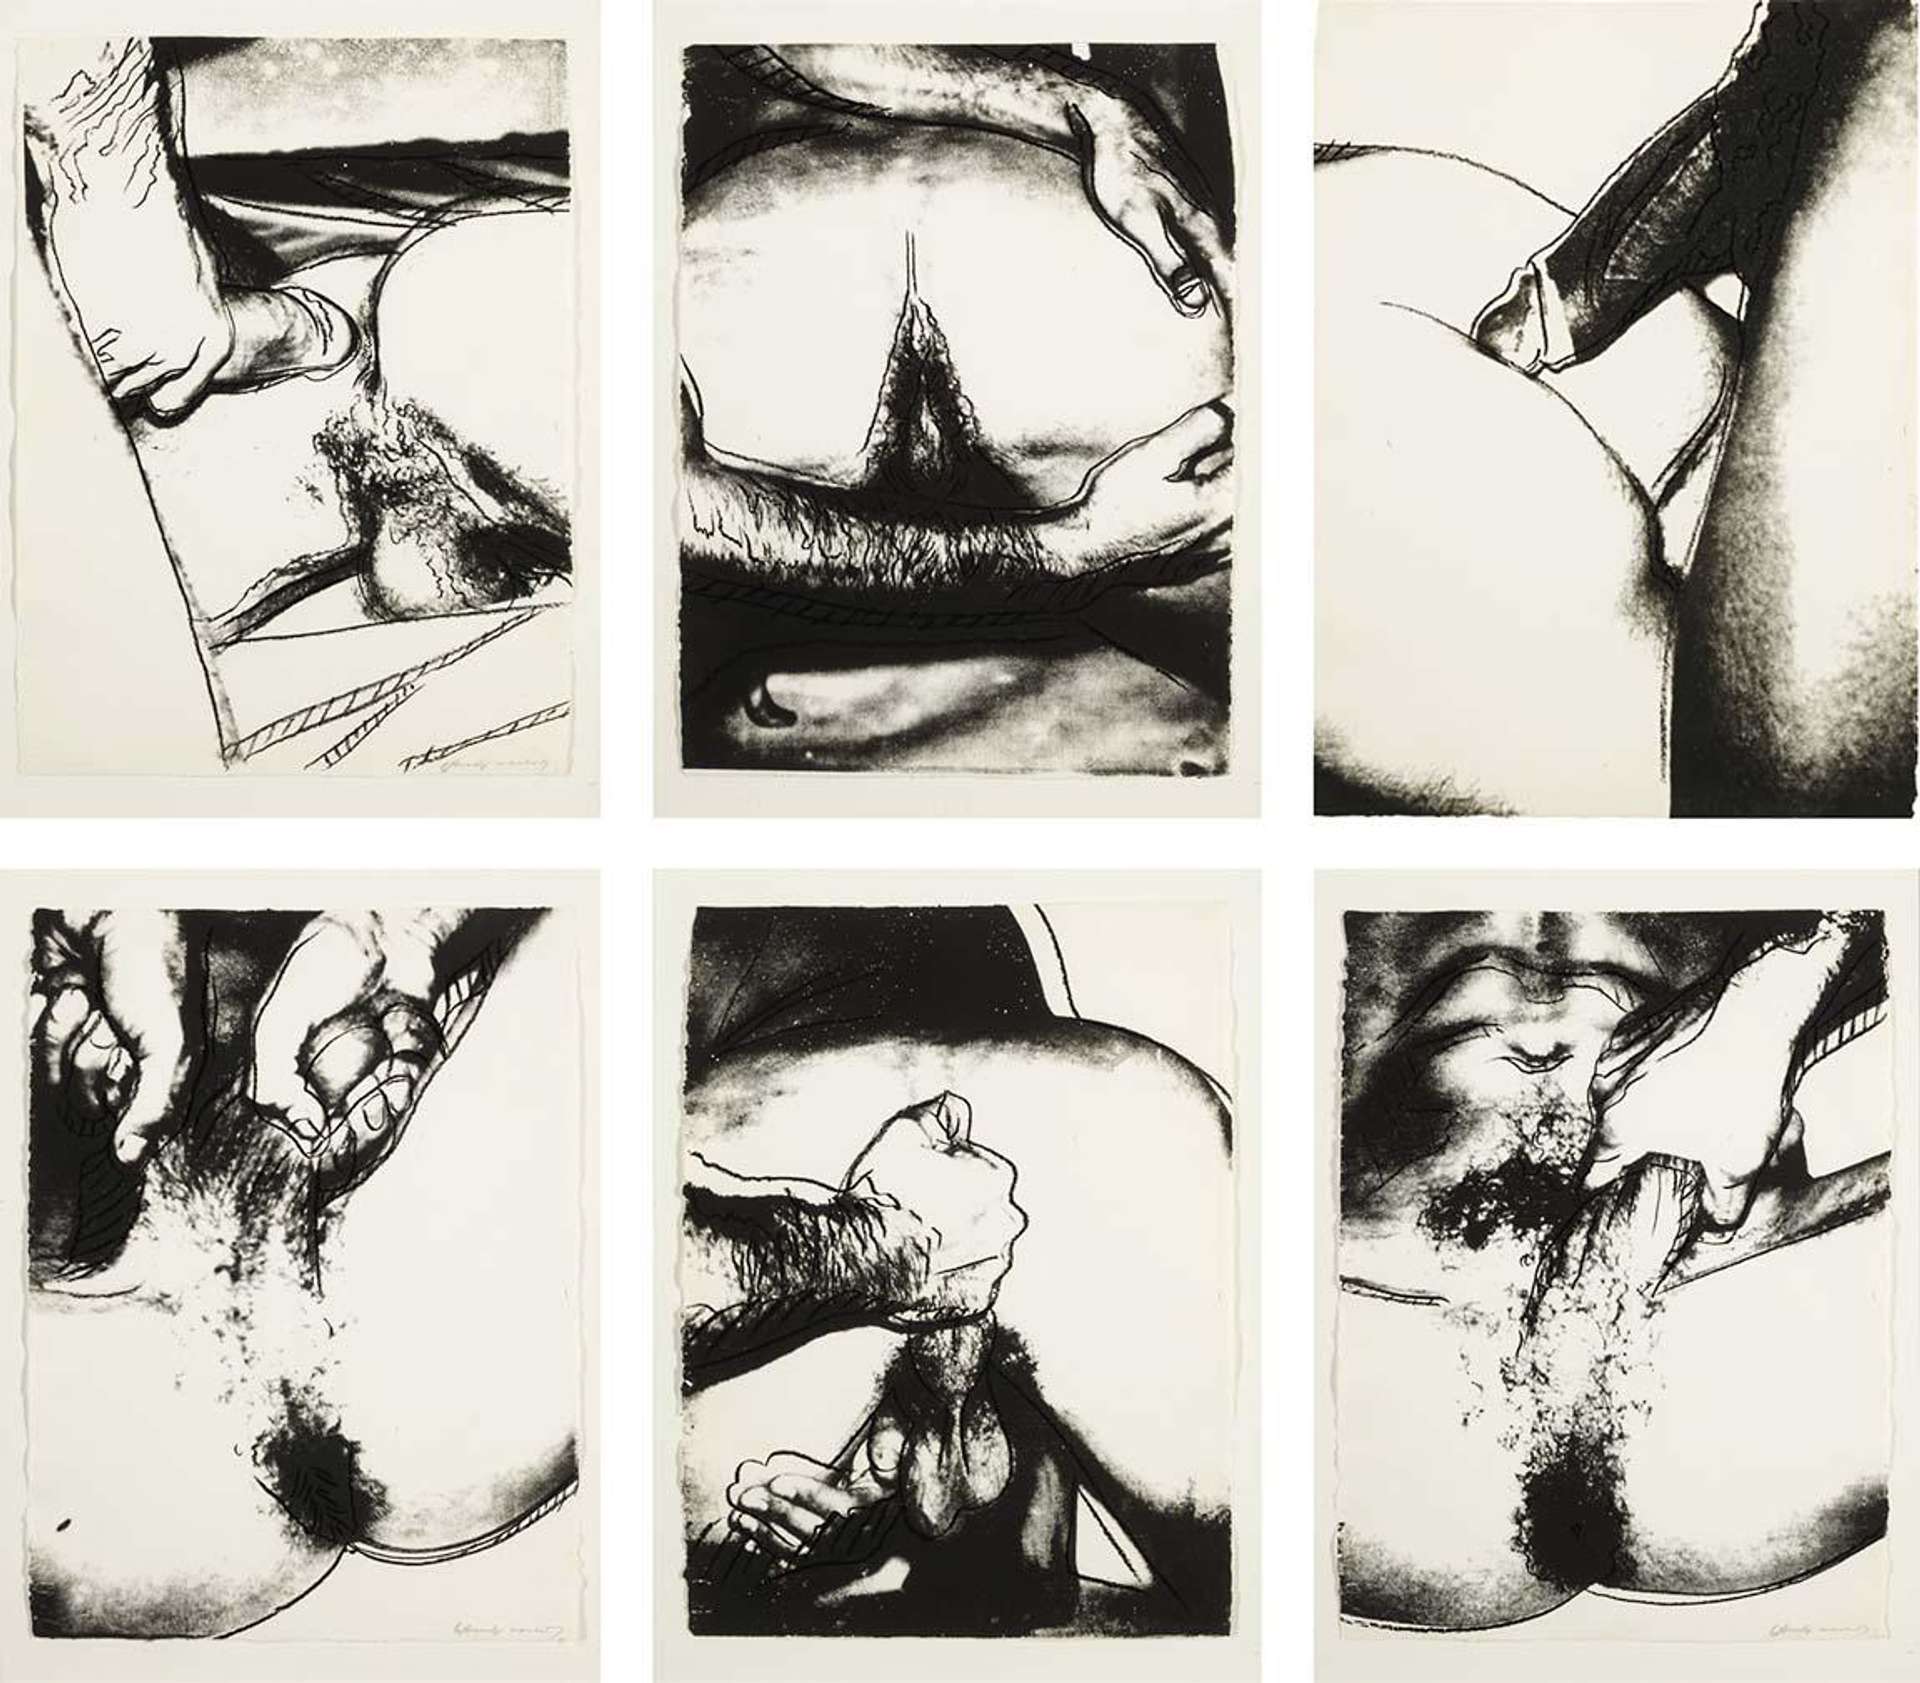 Sex Parts is Andy Warhol’s exploration of the male form. Sex Parts, alongside Torsos, is exceptionally explicit for Warhol, depicting abundant male genitalia, sex acts and bottoms.